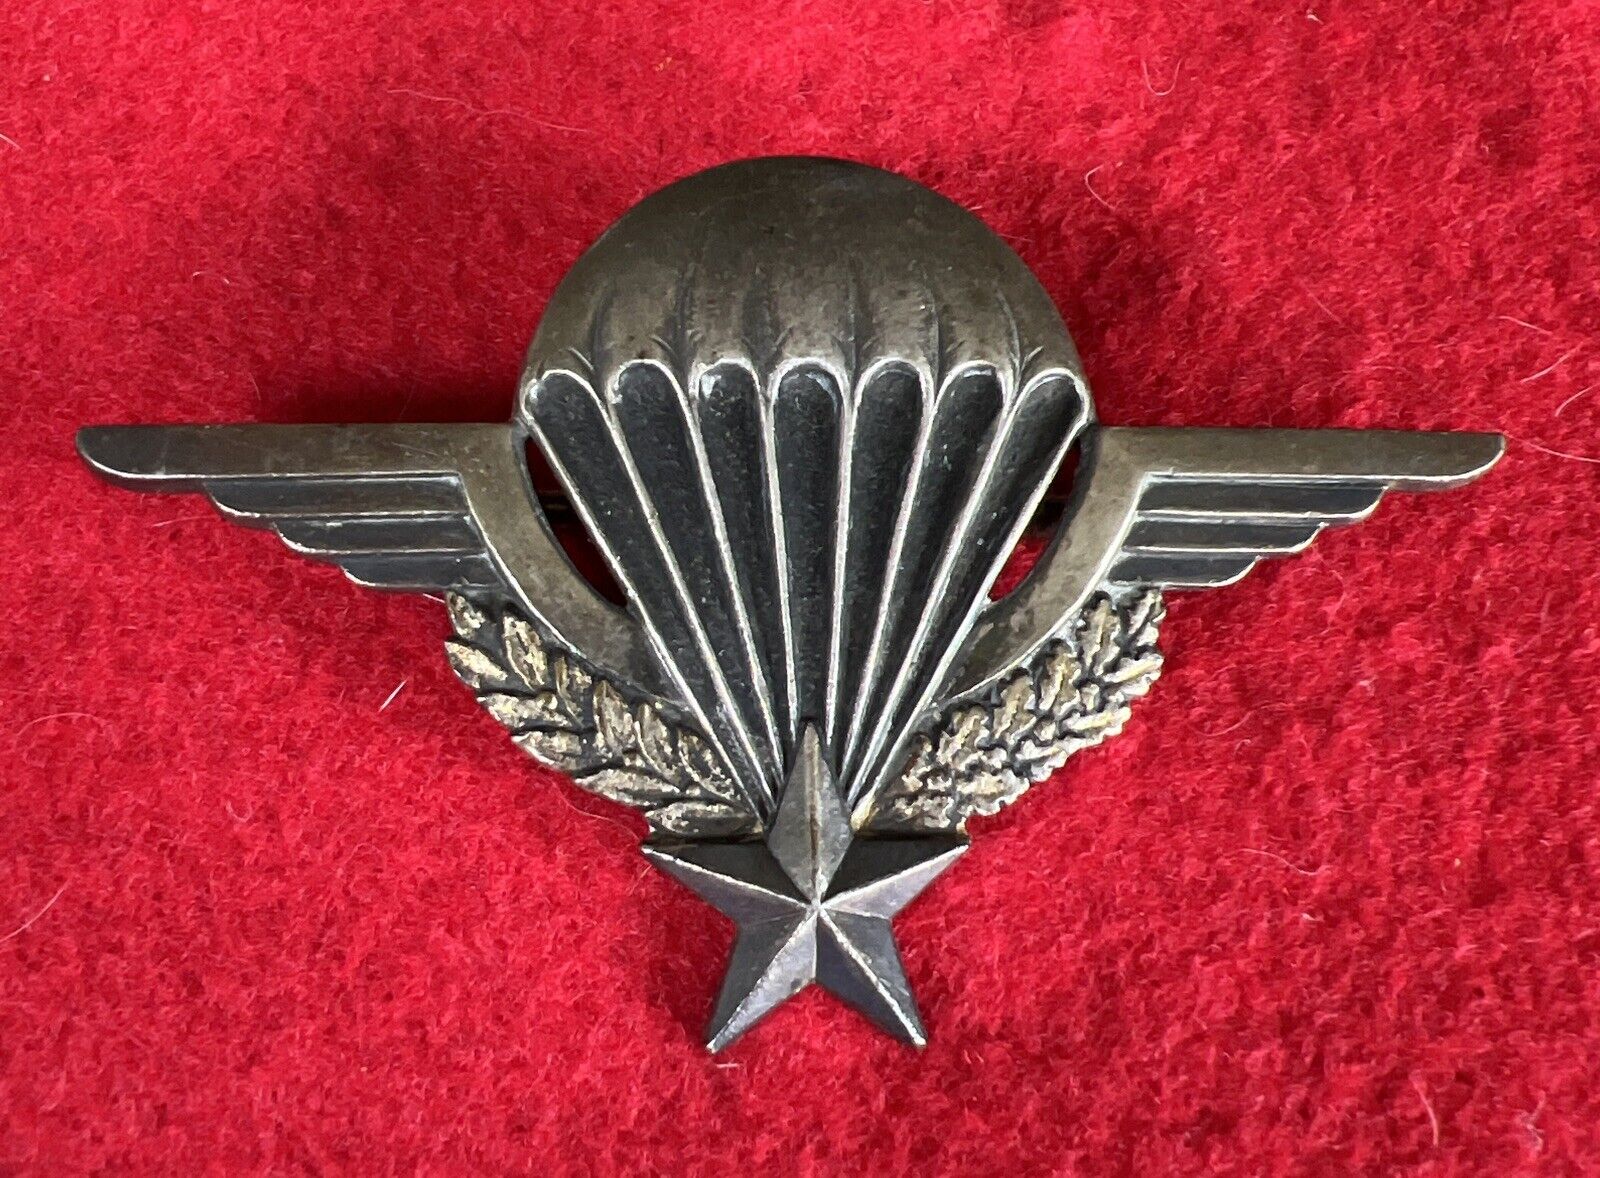 French Basic Jump Wings Pin Paratrooper Brevet Drago HM 1959 Serial Number